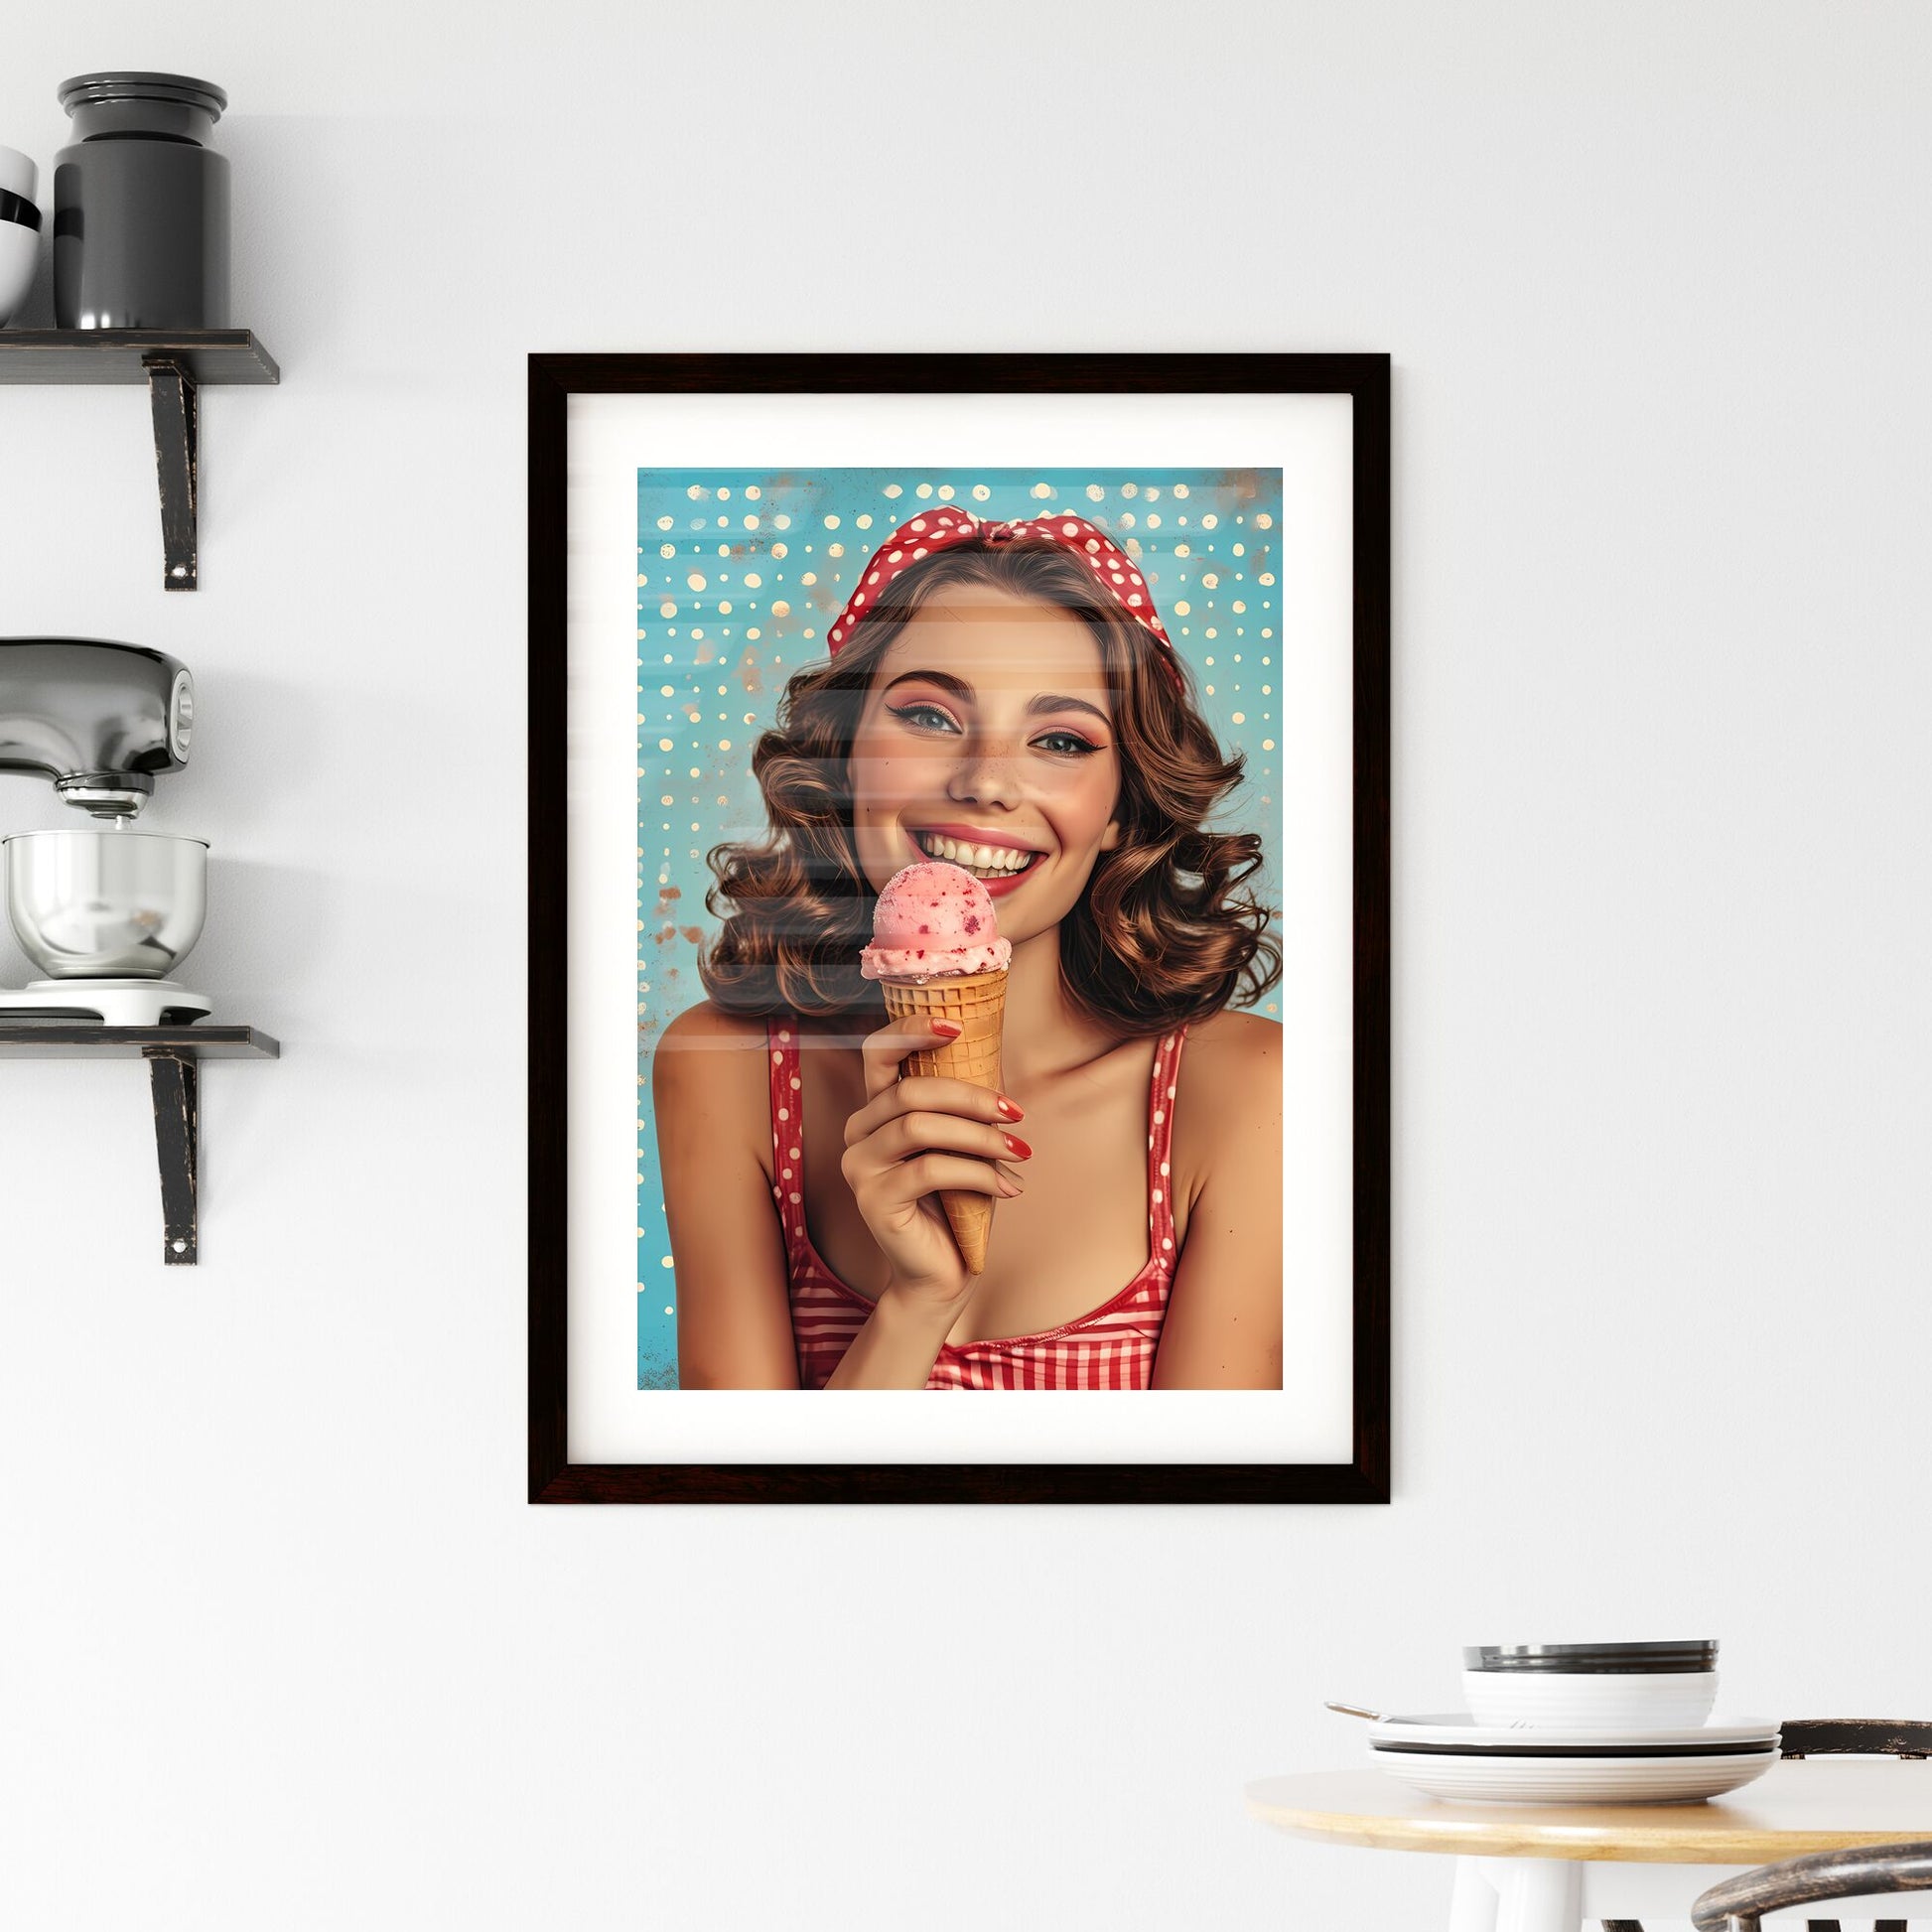 Retro poster - Art print of a woman holding an ice cream cone Default Title